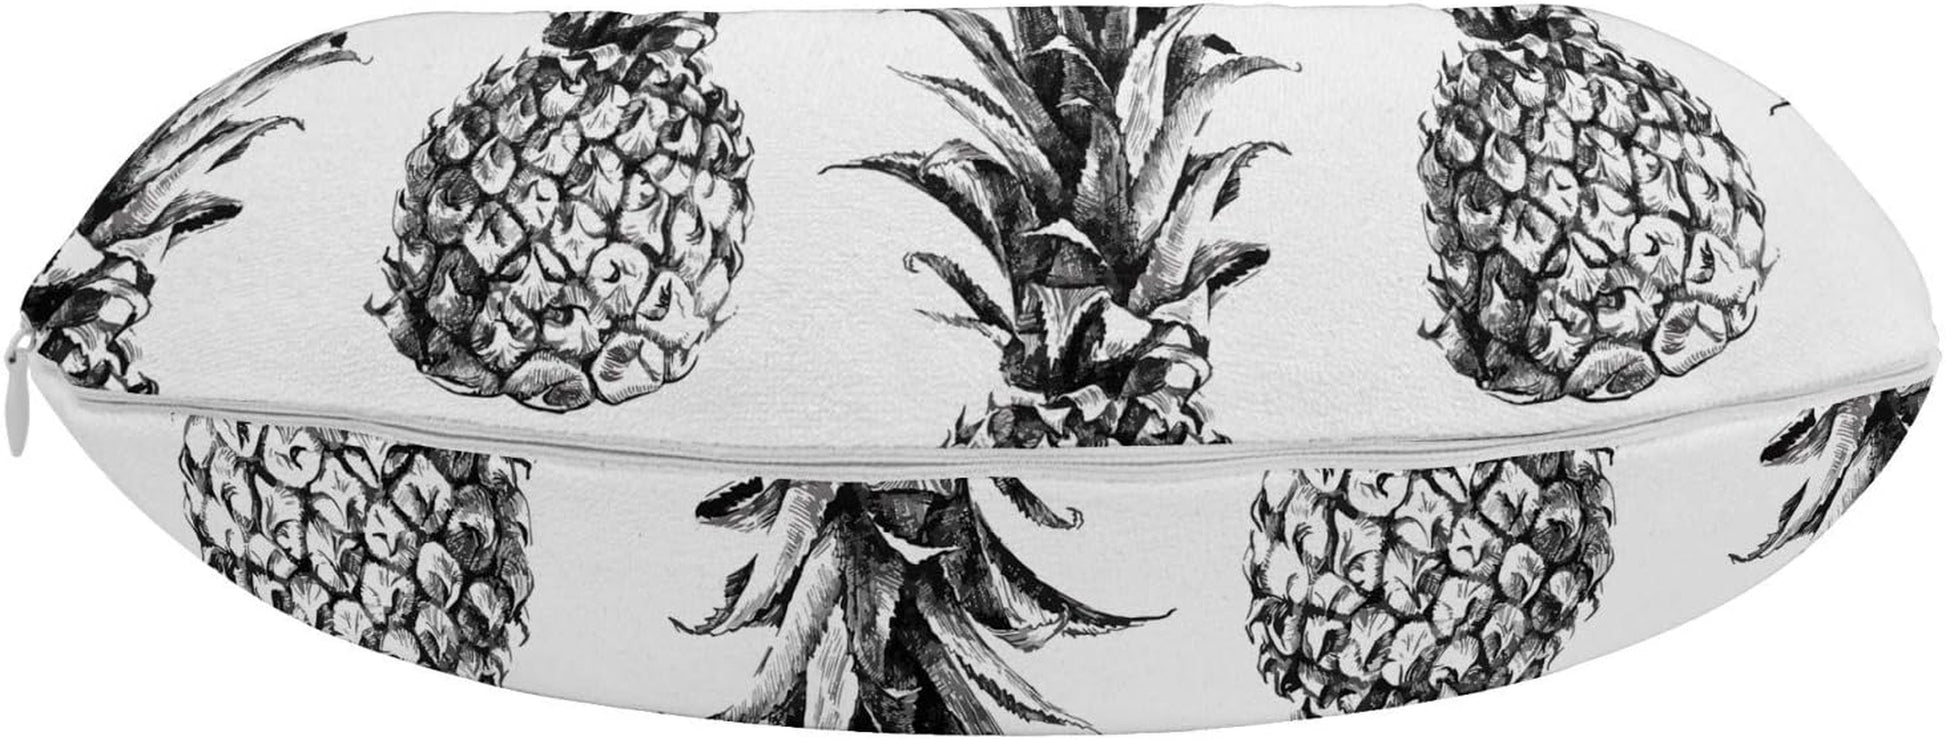 Pineapple Travel Pillow Neck Rest, Hand Drawn Tropical Theme Vintage Style Pineapple Fruit Pattern, Memory Foam Traveling Accessory for Airplane and Car, 12", Black Grey